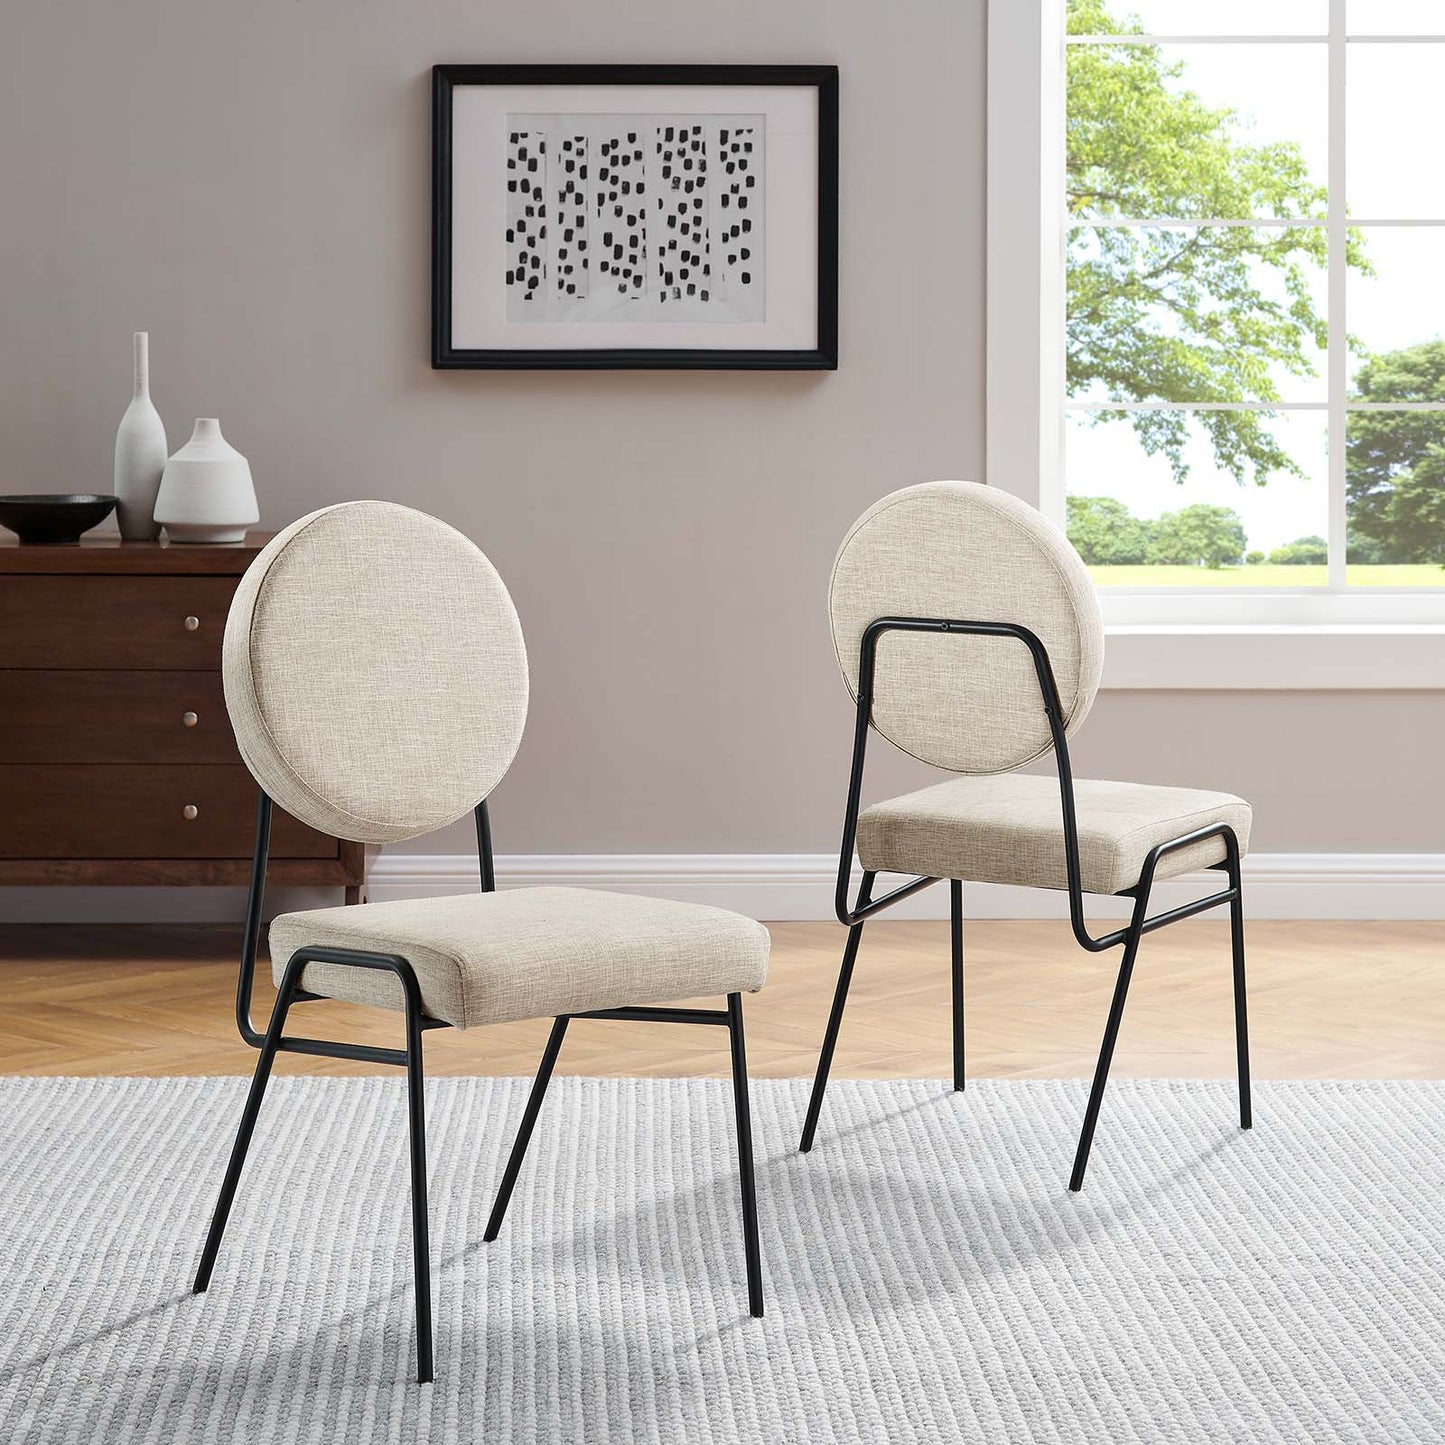 Craft Upholstered Fabric Dining Side Chairs - Set of 2 Black Beige EEI-6582-BLK-BEI